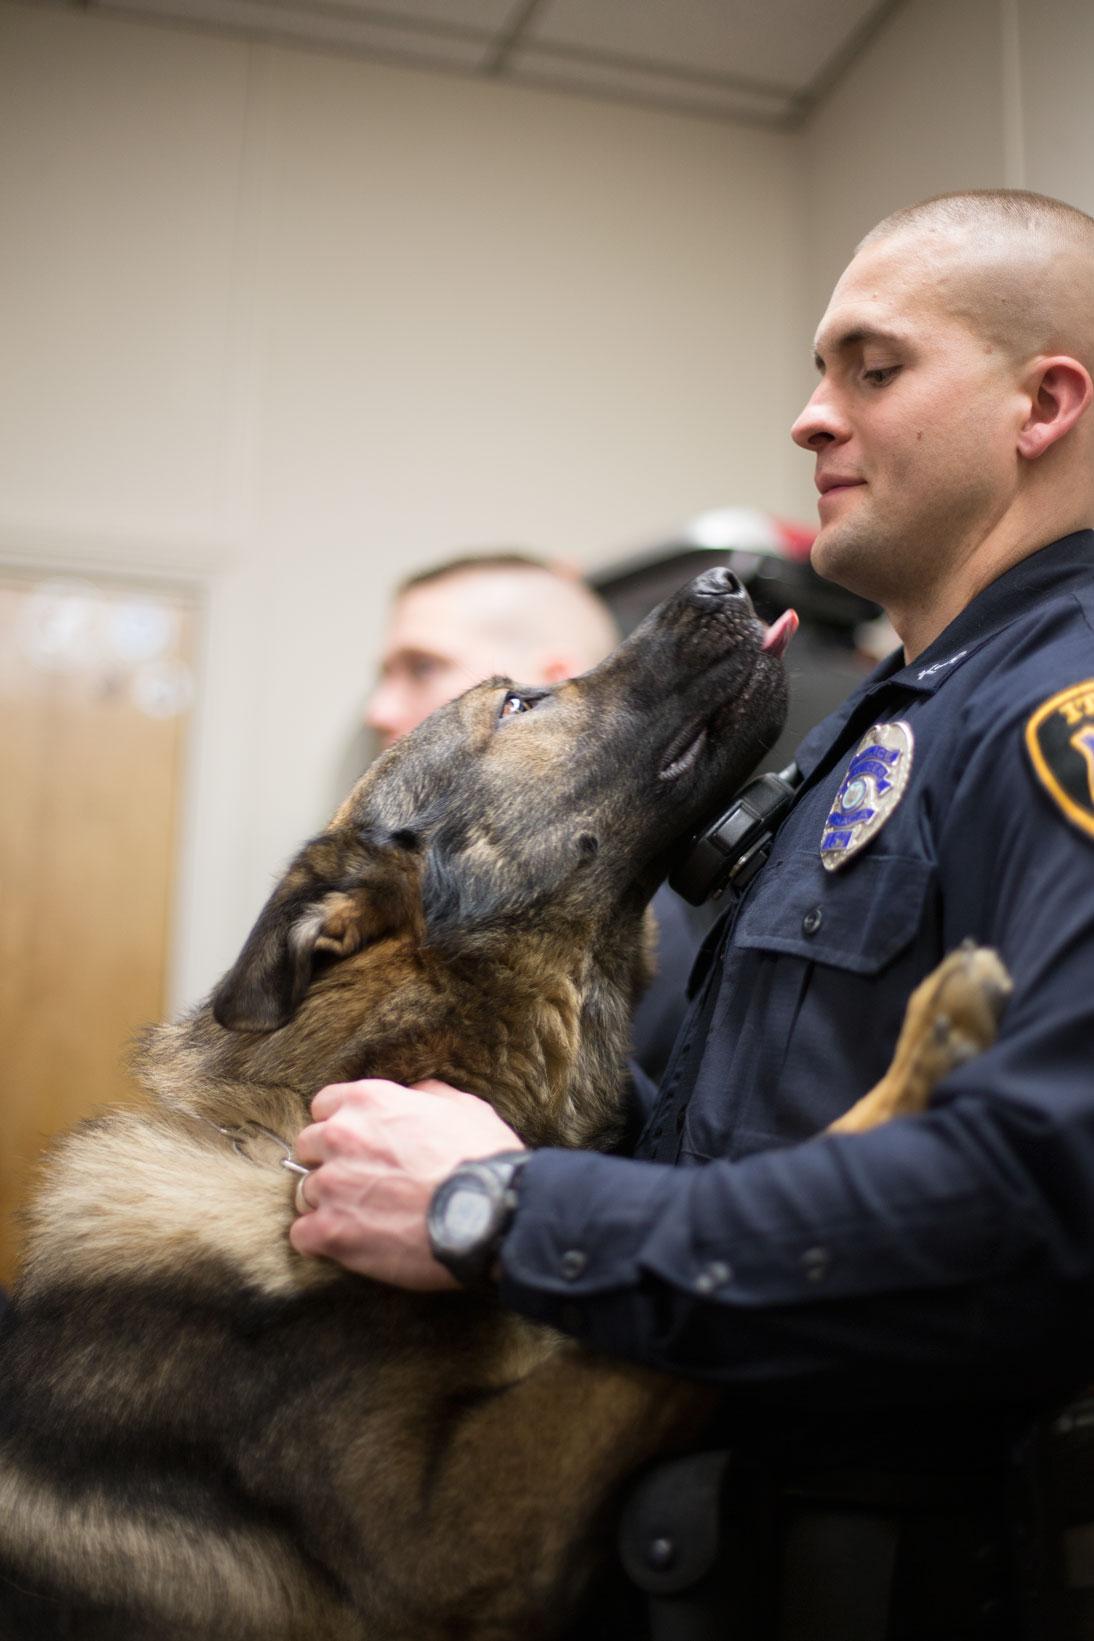 Tucker Mitchell/ The Ithacan  Bert leaps up to lick Kimmich's face during a briefing March 28. While in the station, Bert  accompanies Kimmich at all times, joining him for briefings and saying hello to fellow officers.